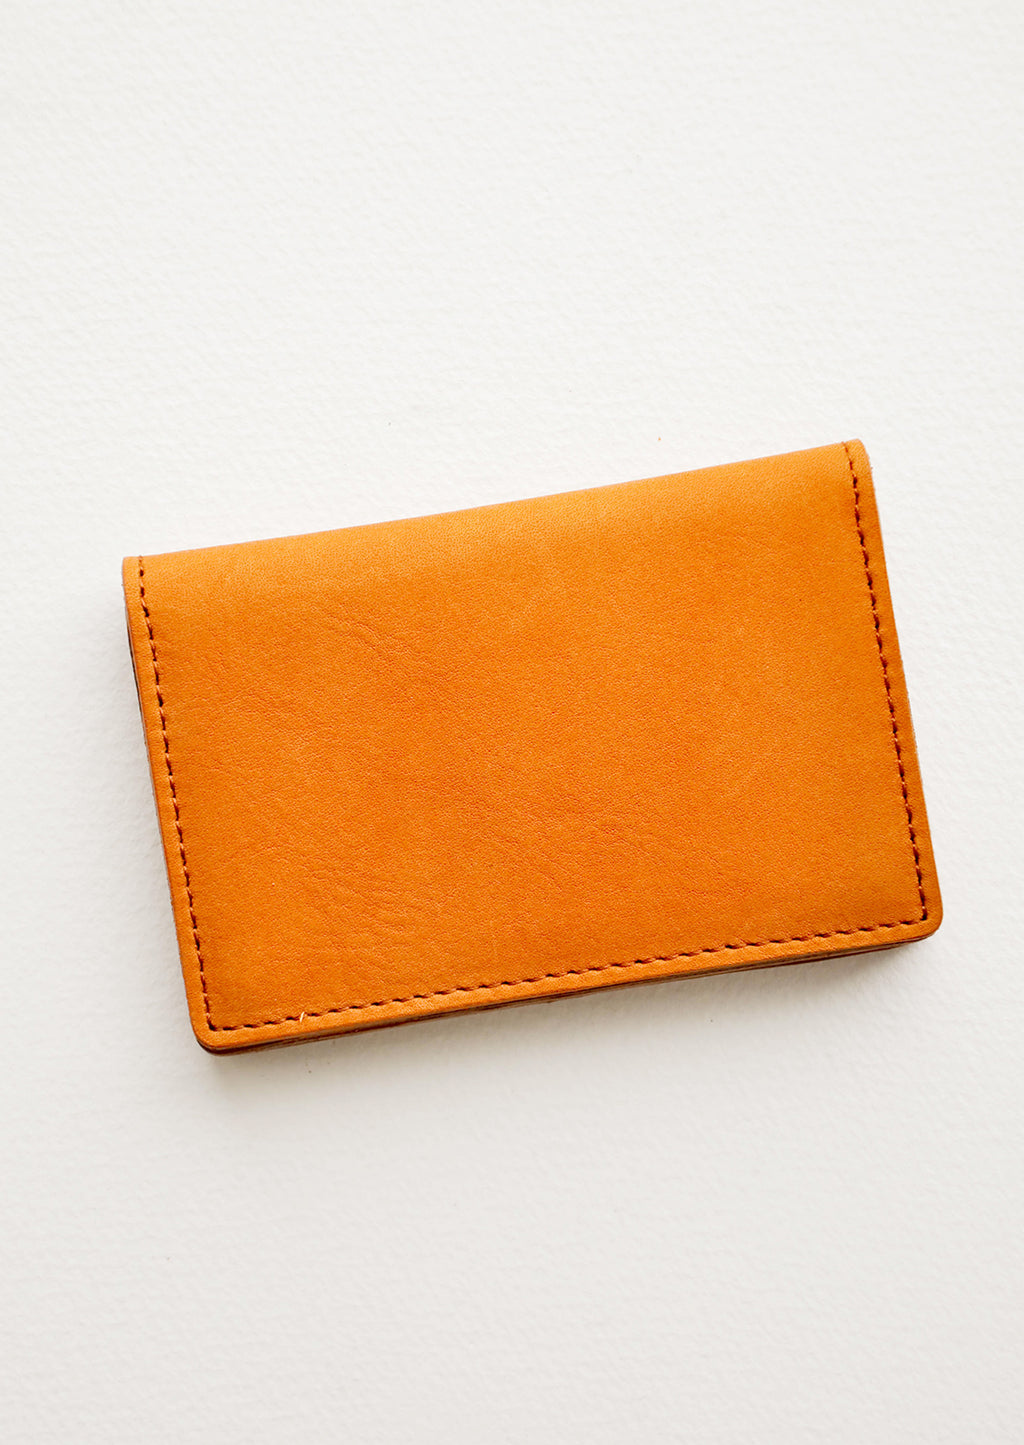 Oiled Saddle: A small leather cardholder wallet in tanned leather.